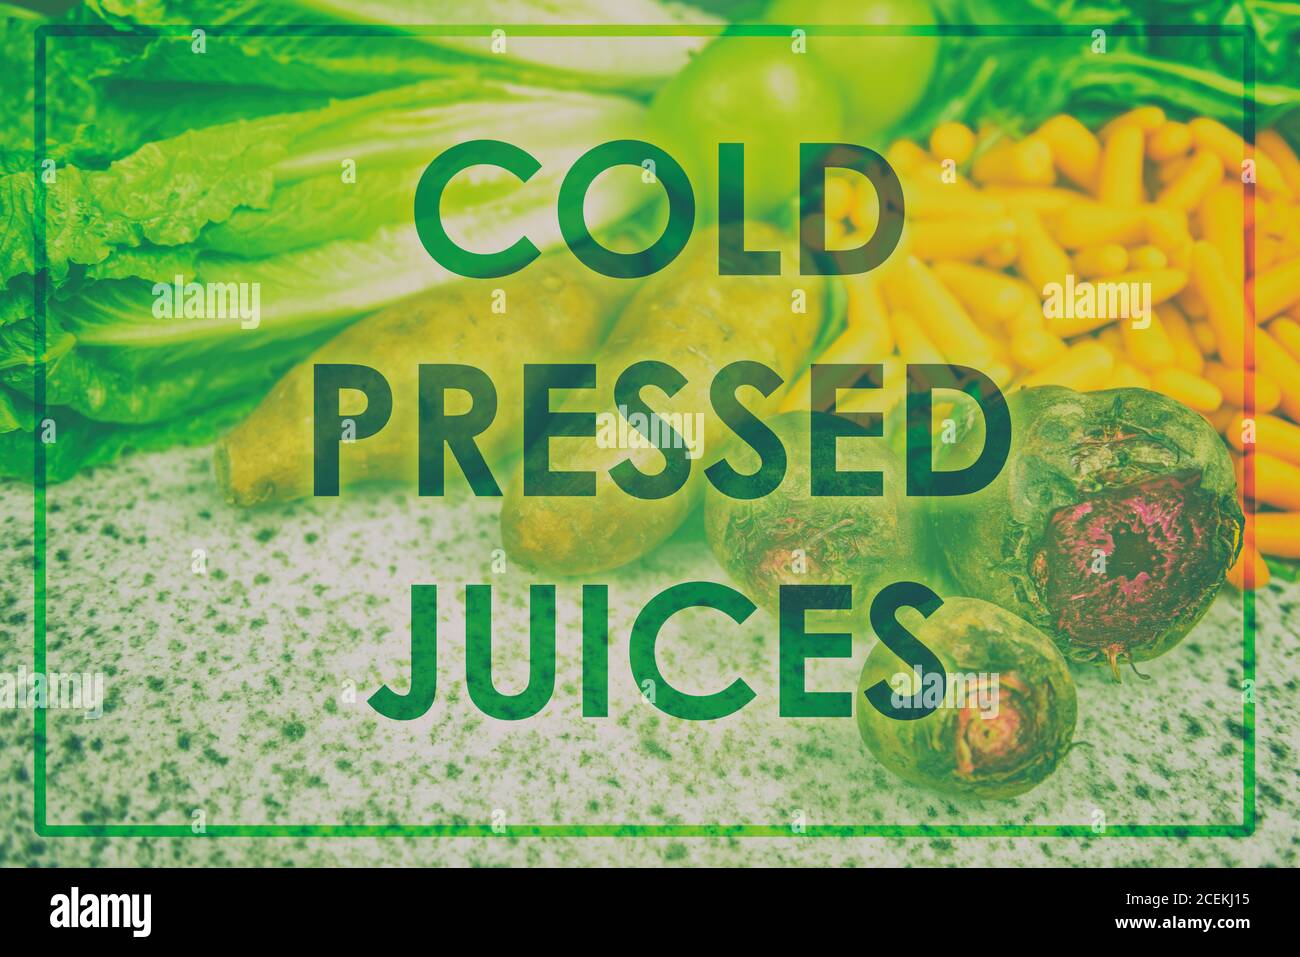 Juice text as title on poster. Words COLD PRESSED JUICES for advertising sign over picture of fresh vegetables. Detox, dieting, clean eating Stock Photo